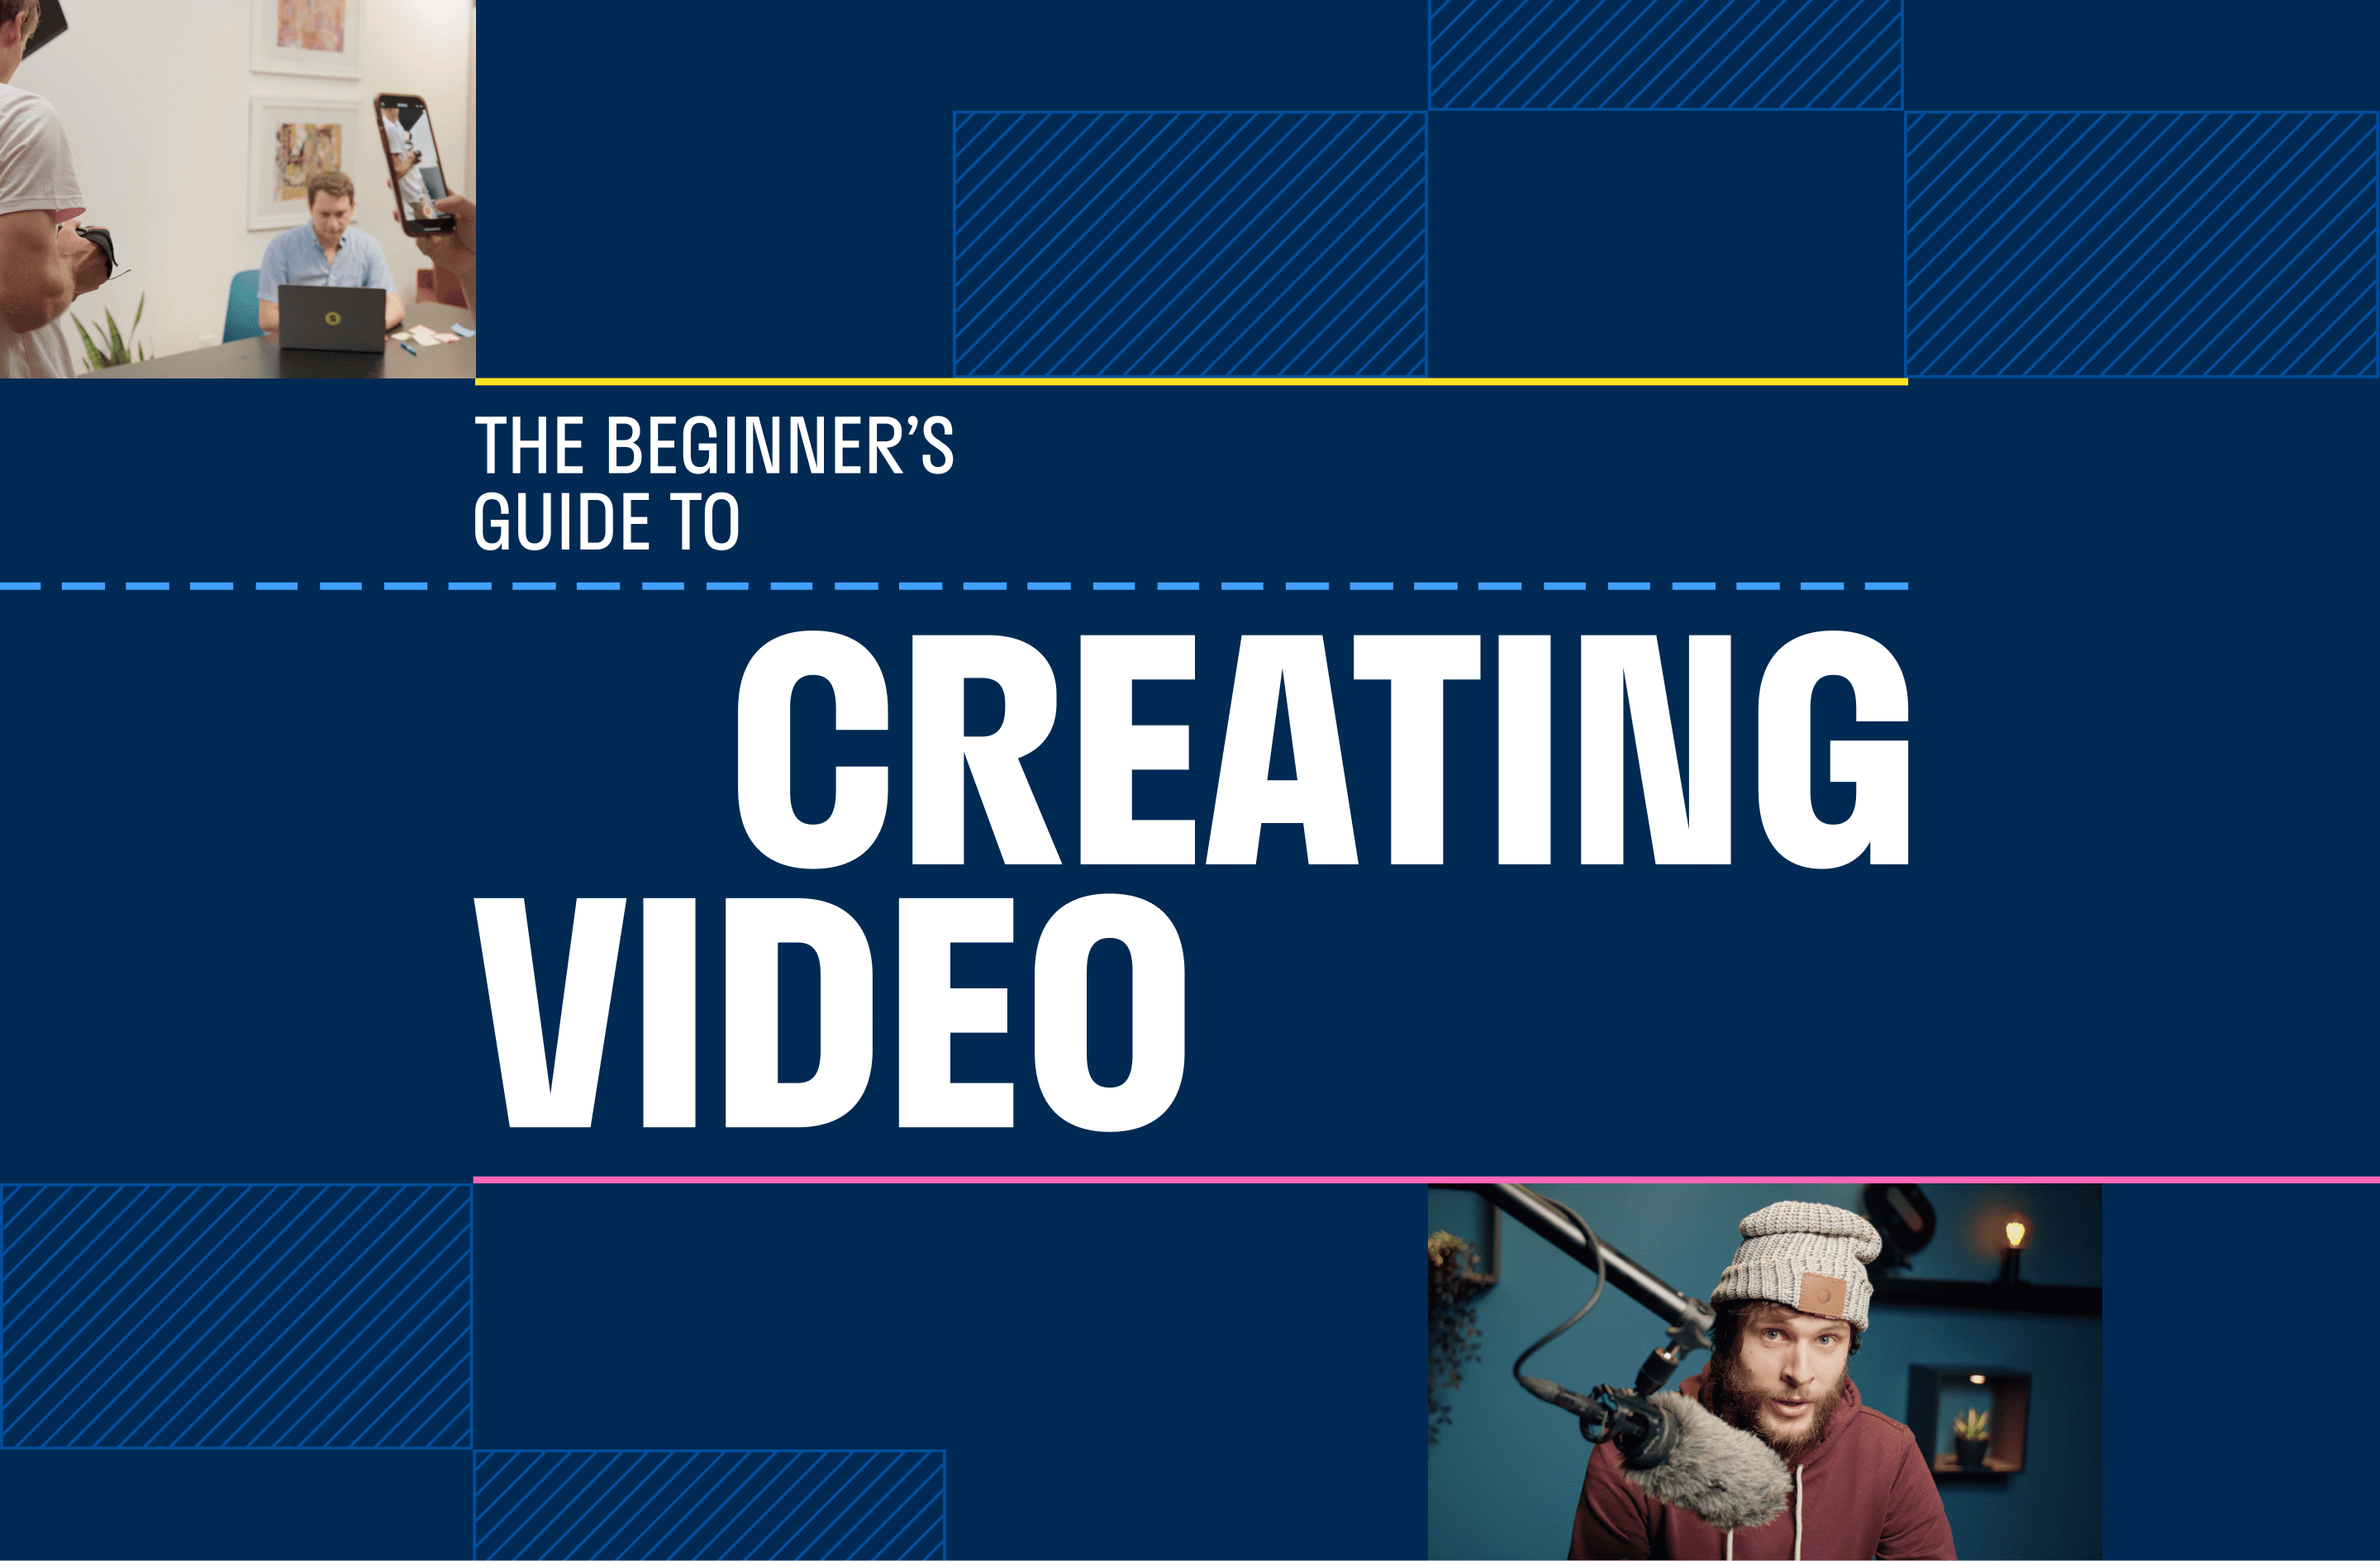 Introducing The Beginner's Guide to Creating Video: A Beginner's guide to video planning, filming, editing, distribution, and measurement